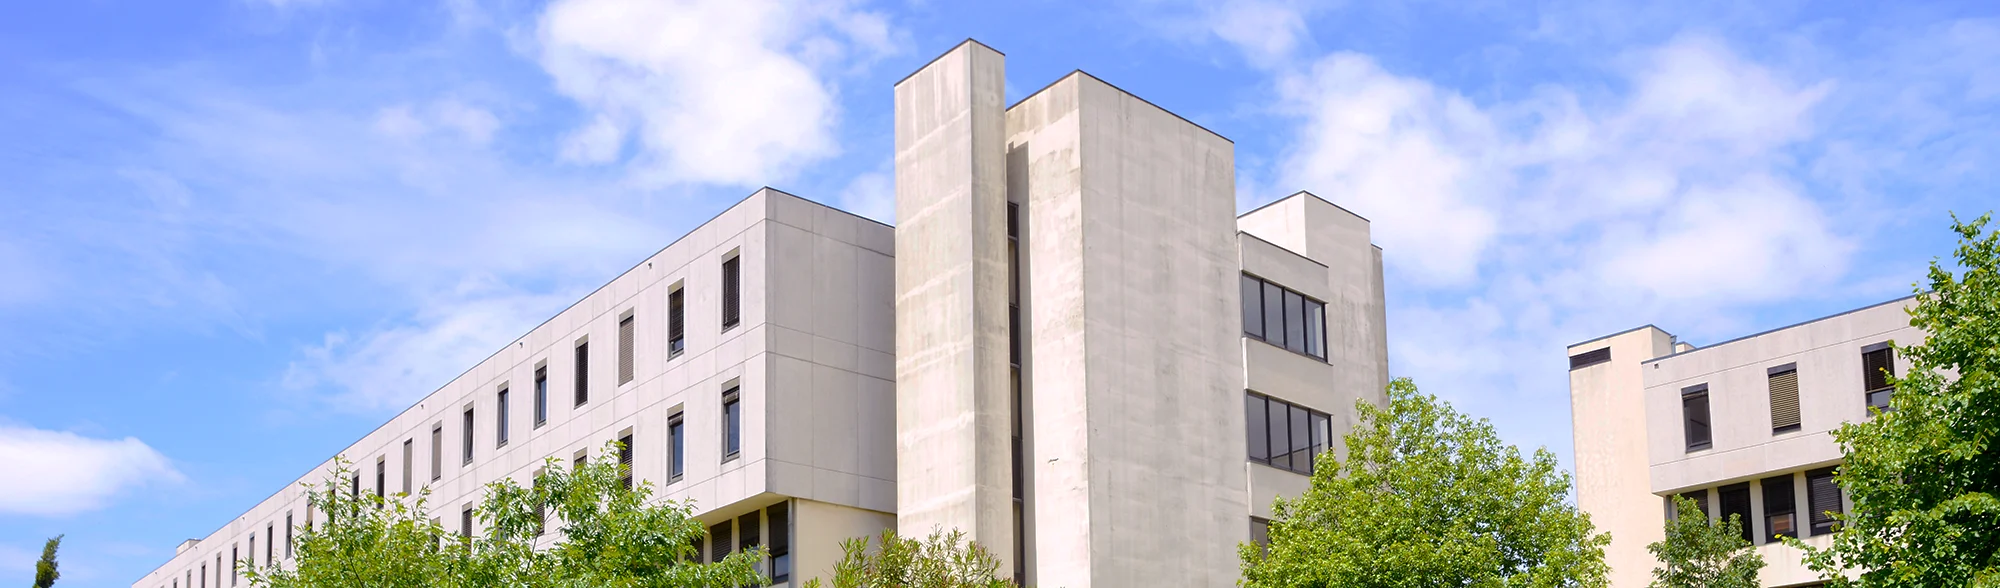 external view of the building of the Faculty of Sciences of the University of Porto